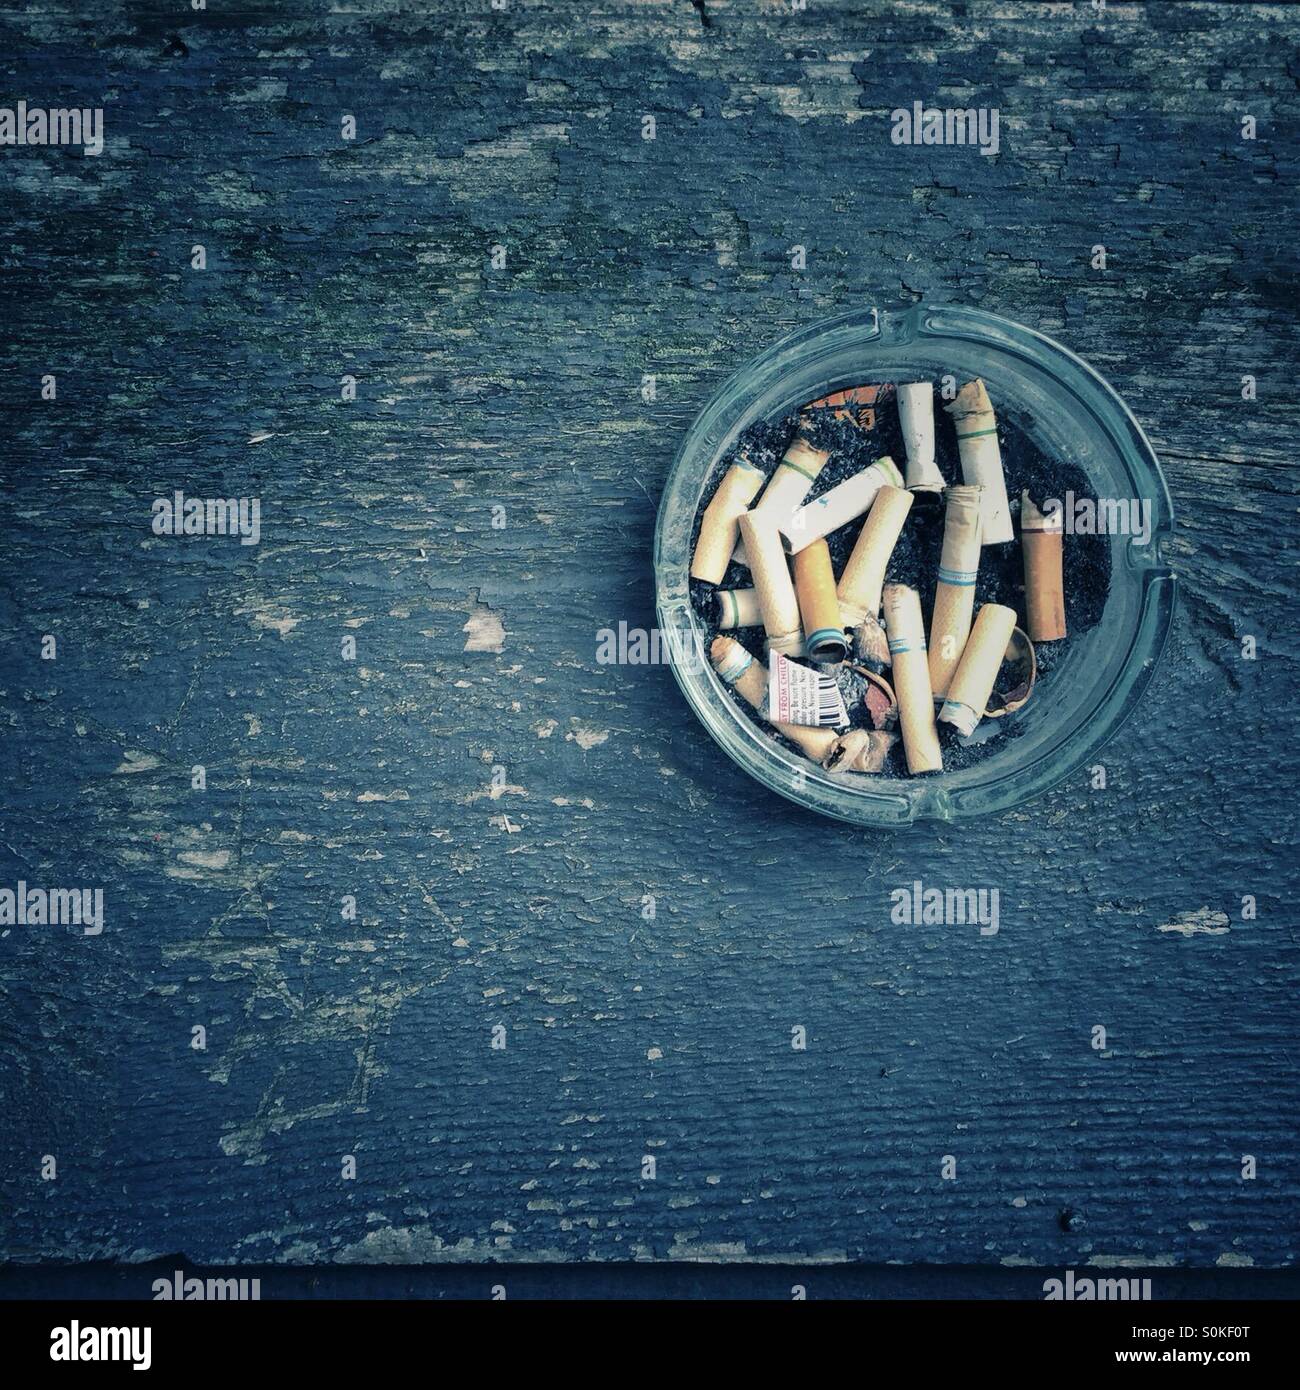 A jar full of cigarette butts on a old porch railing Stock Photo